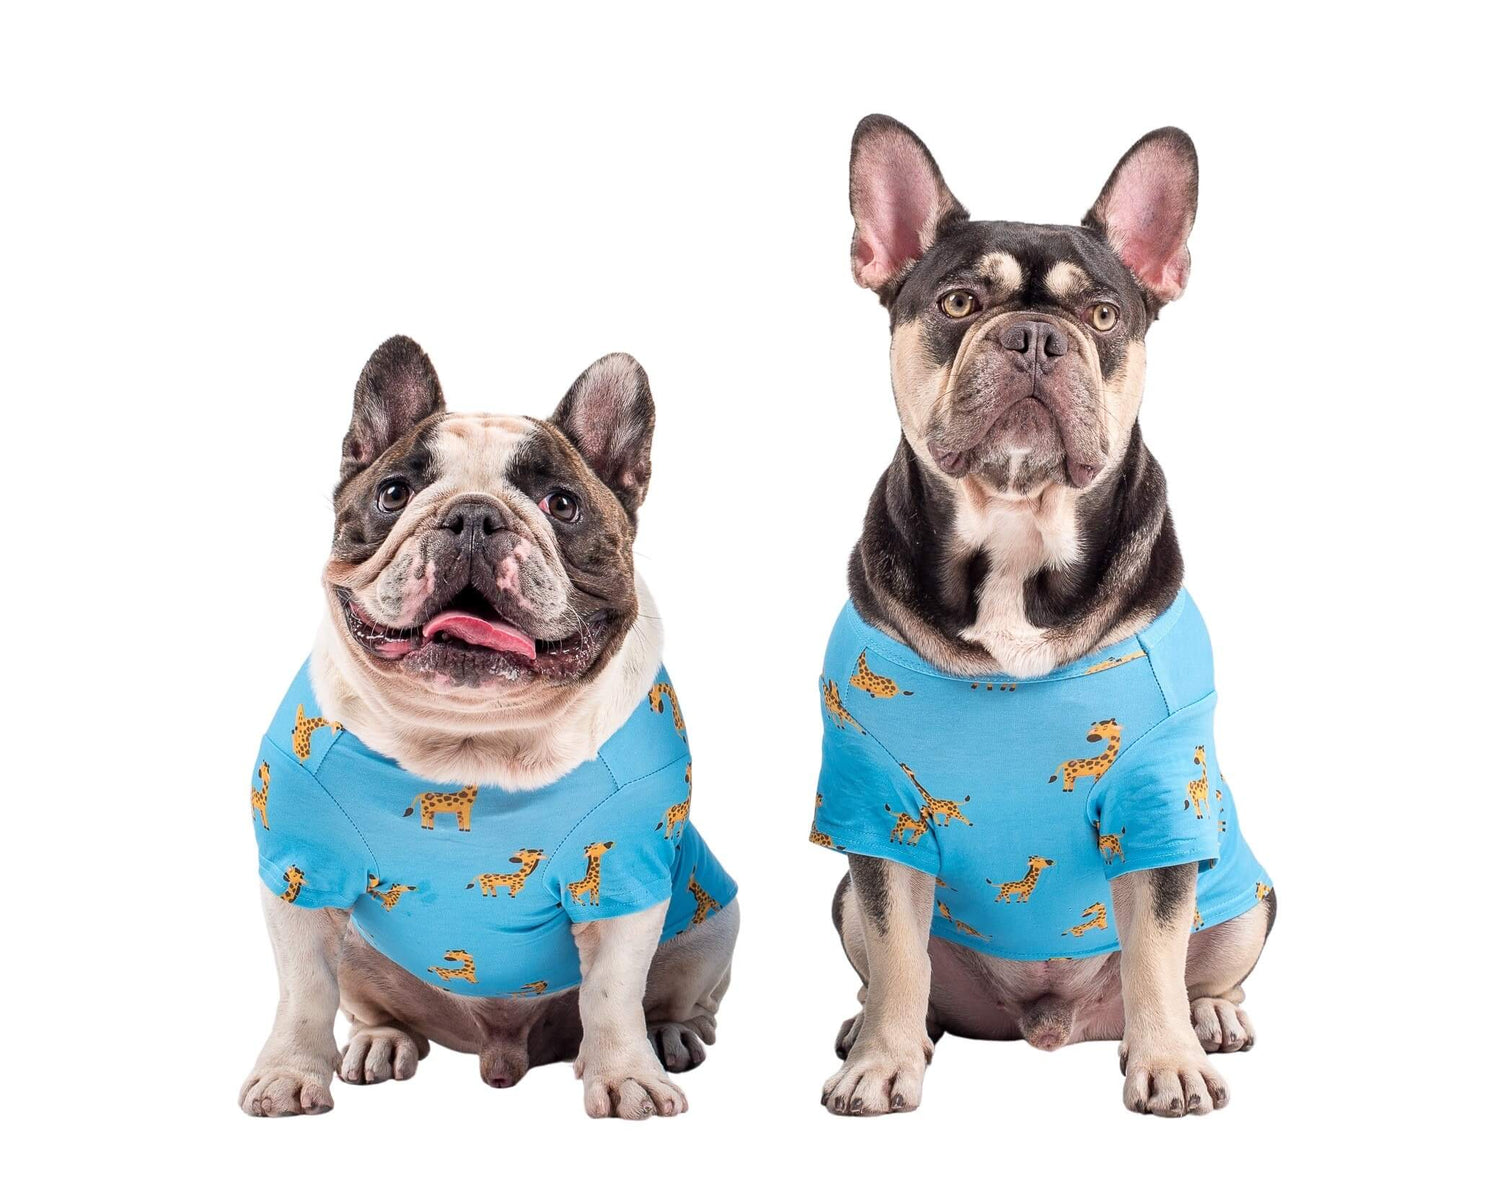 Two French Bulldogs wearing Gerald the Giraffe dog pyjamas made by Vibrant Hound. The dog pyjamas are blue, with girrafes printed on them.